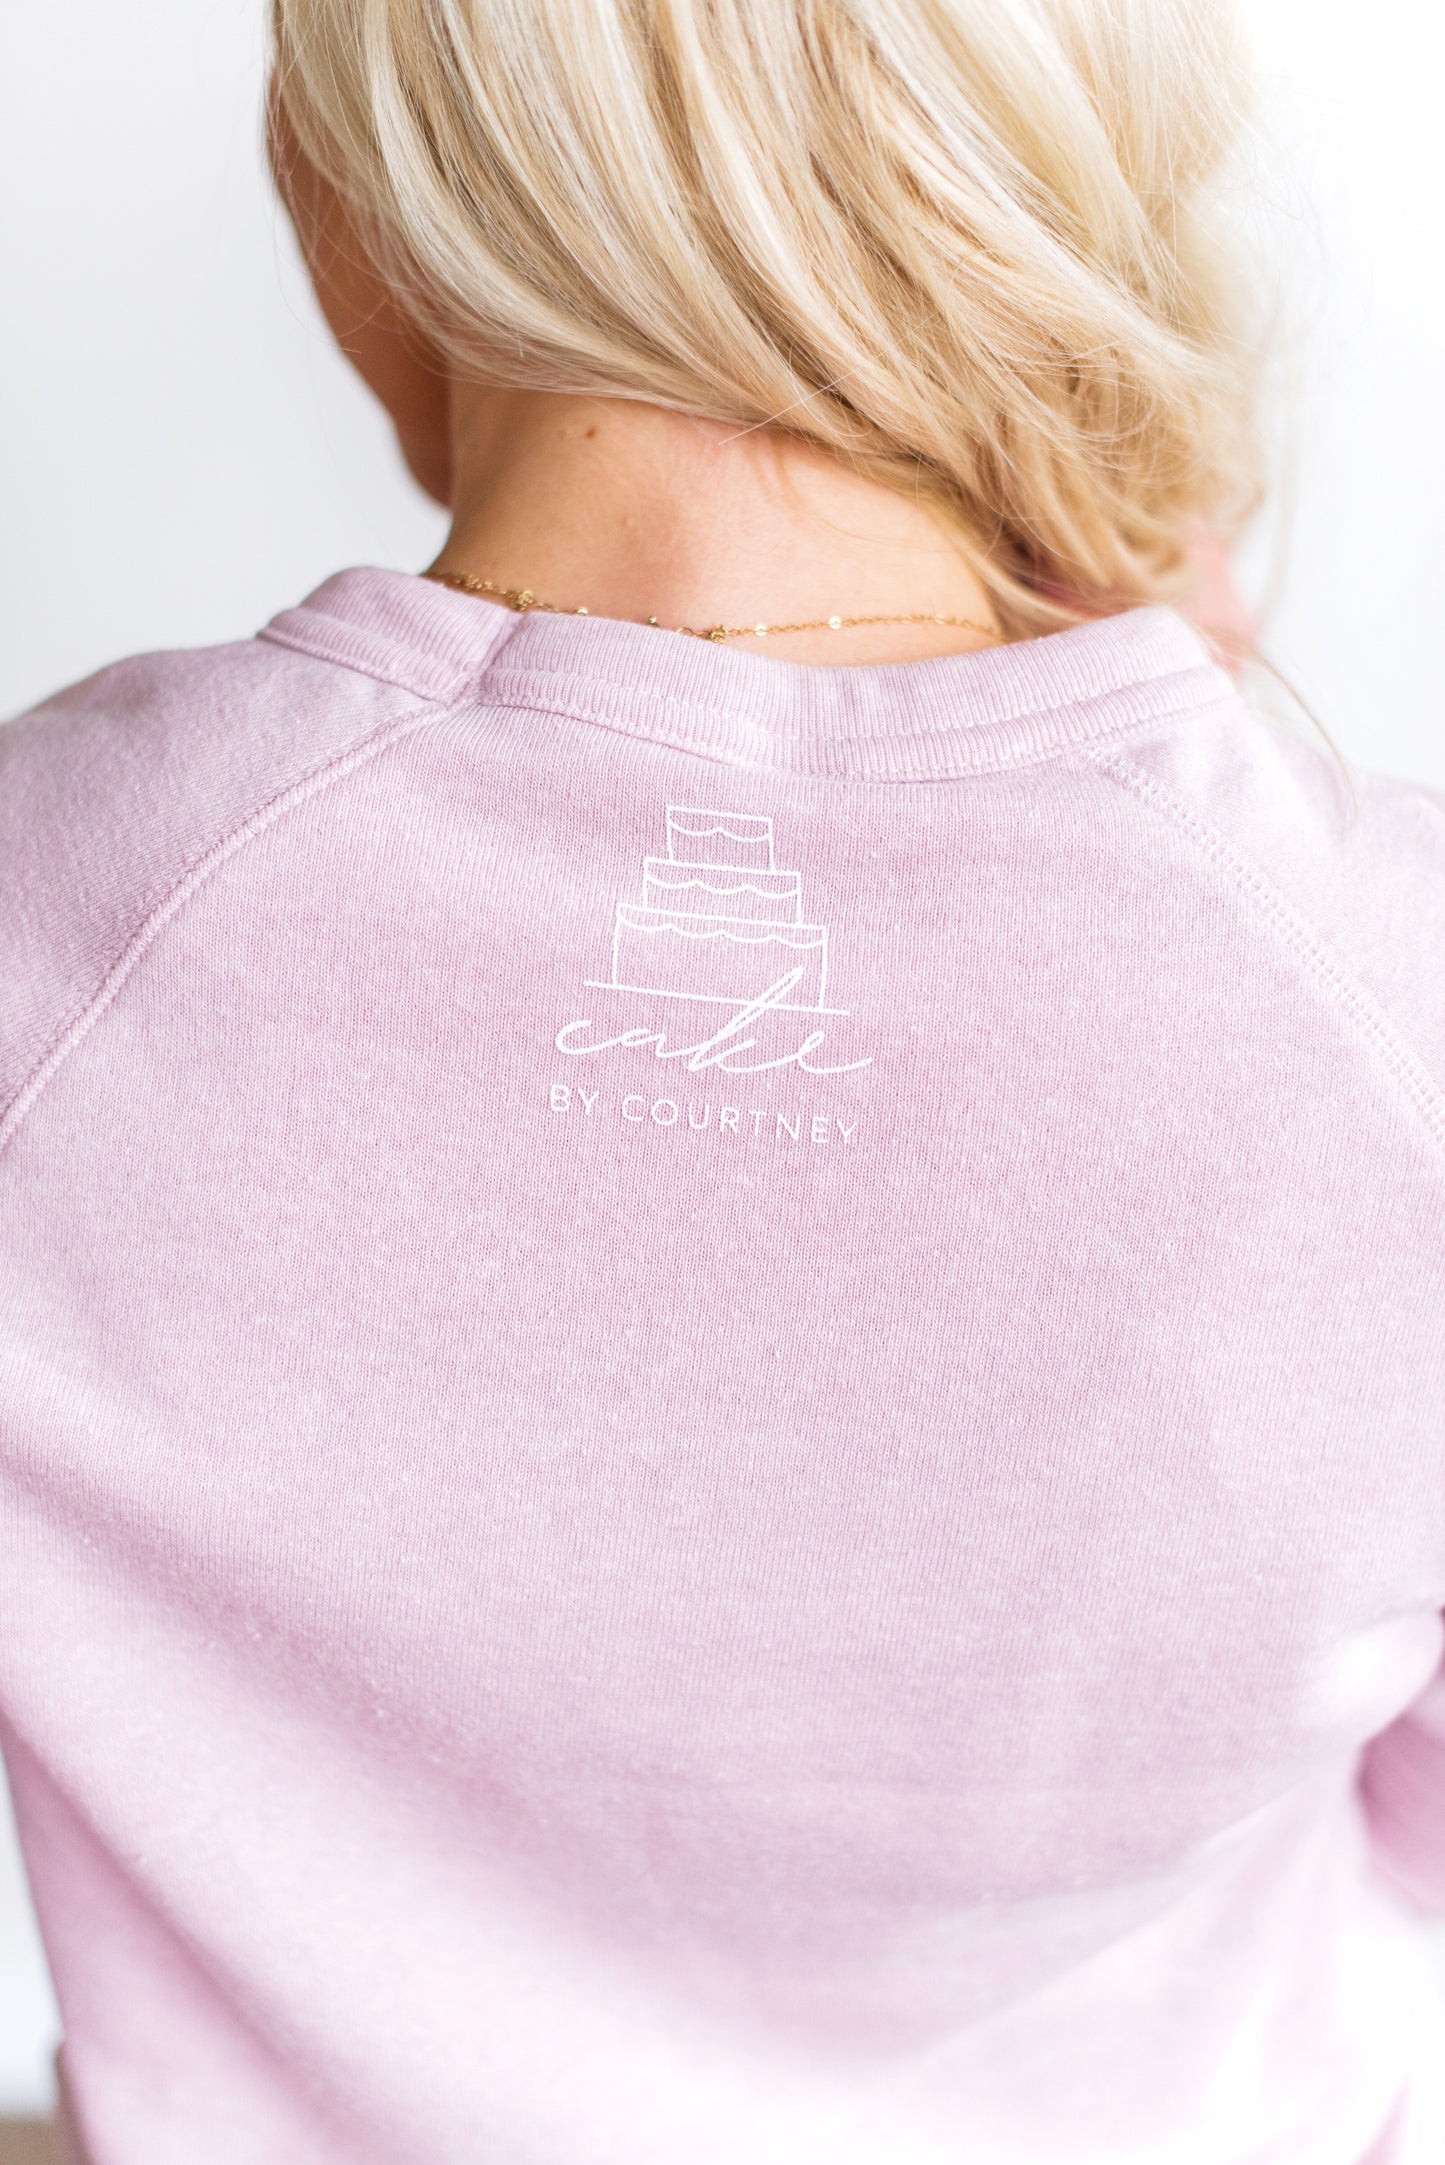 The back of Courtney's light pink 'my good side' sweatshirt showing a close up of Courtneys cake logo at the top of the neck.